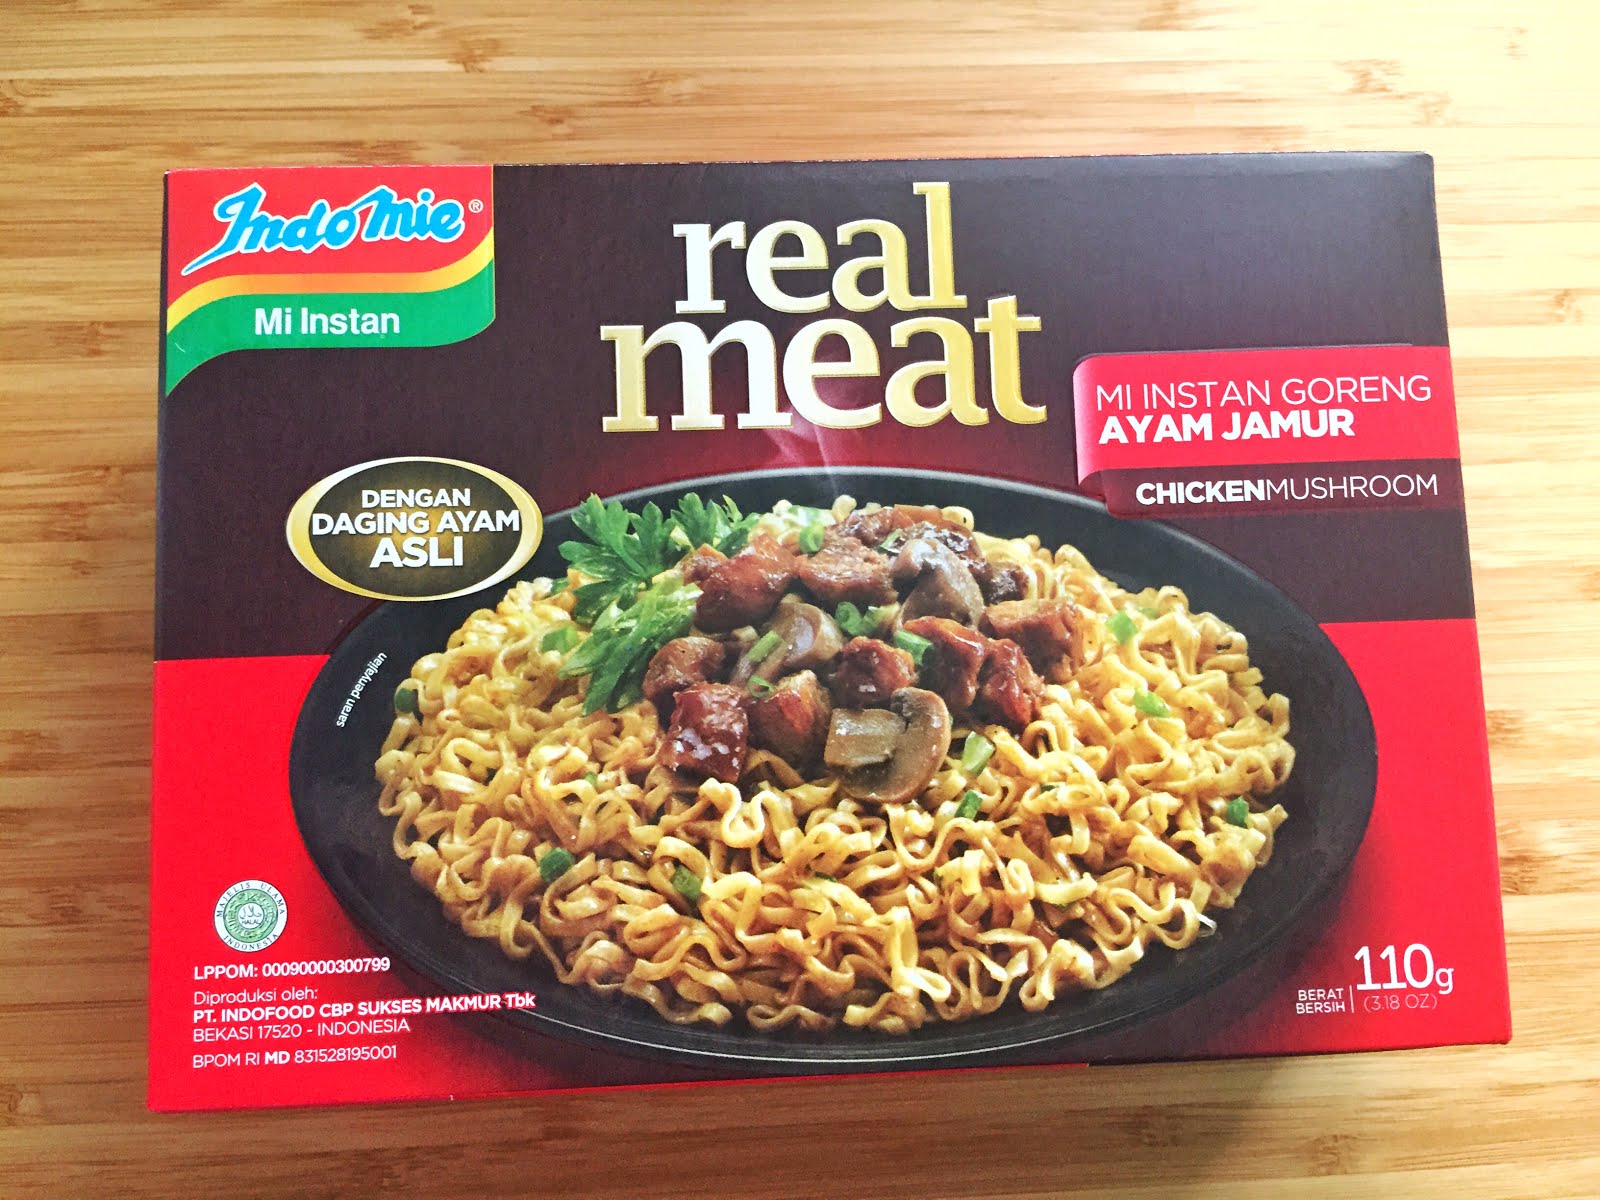 Indomie Real Meat -- Asian Chicken Mushroom Noodle in Instant